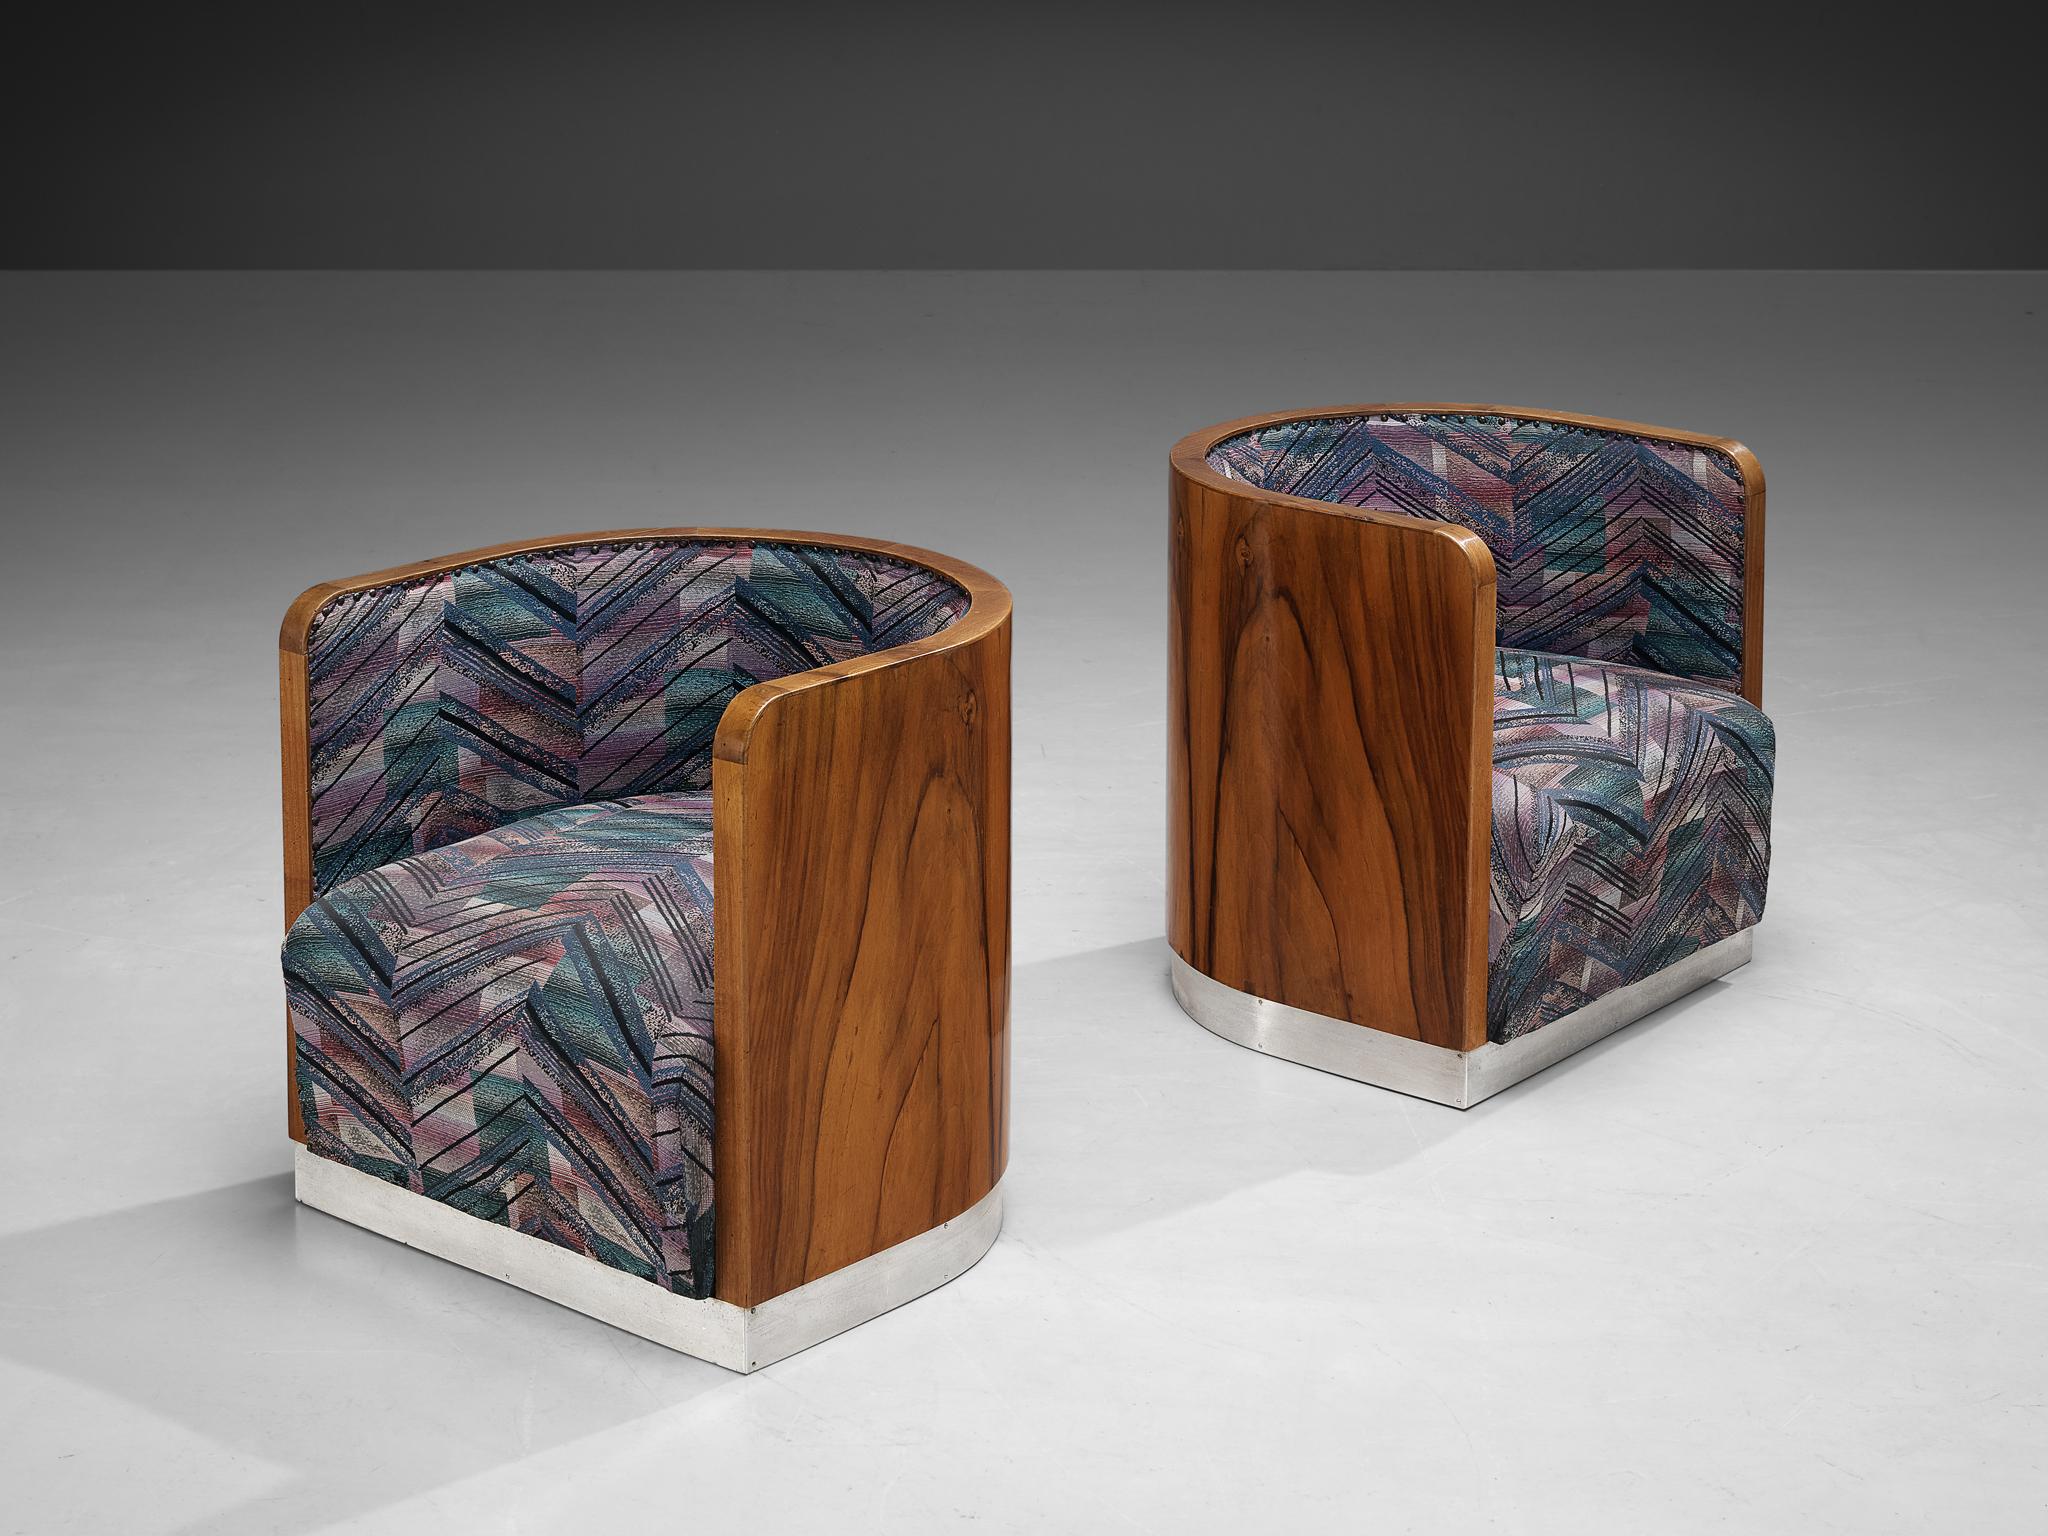 Pair of club chairs, walnut, metal, fabric, Italy, 1970s

The construction of these wonderful barrel chairs shows strong resemblance to the features of the Art Deco design language. The corpus is executed in walnut exhibiting a beautiful round